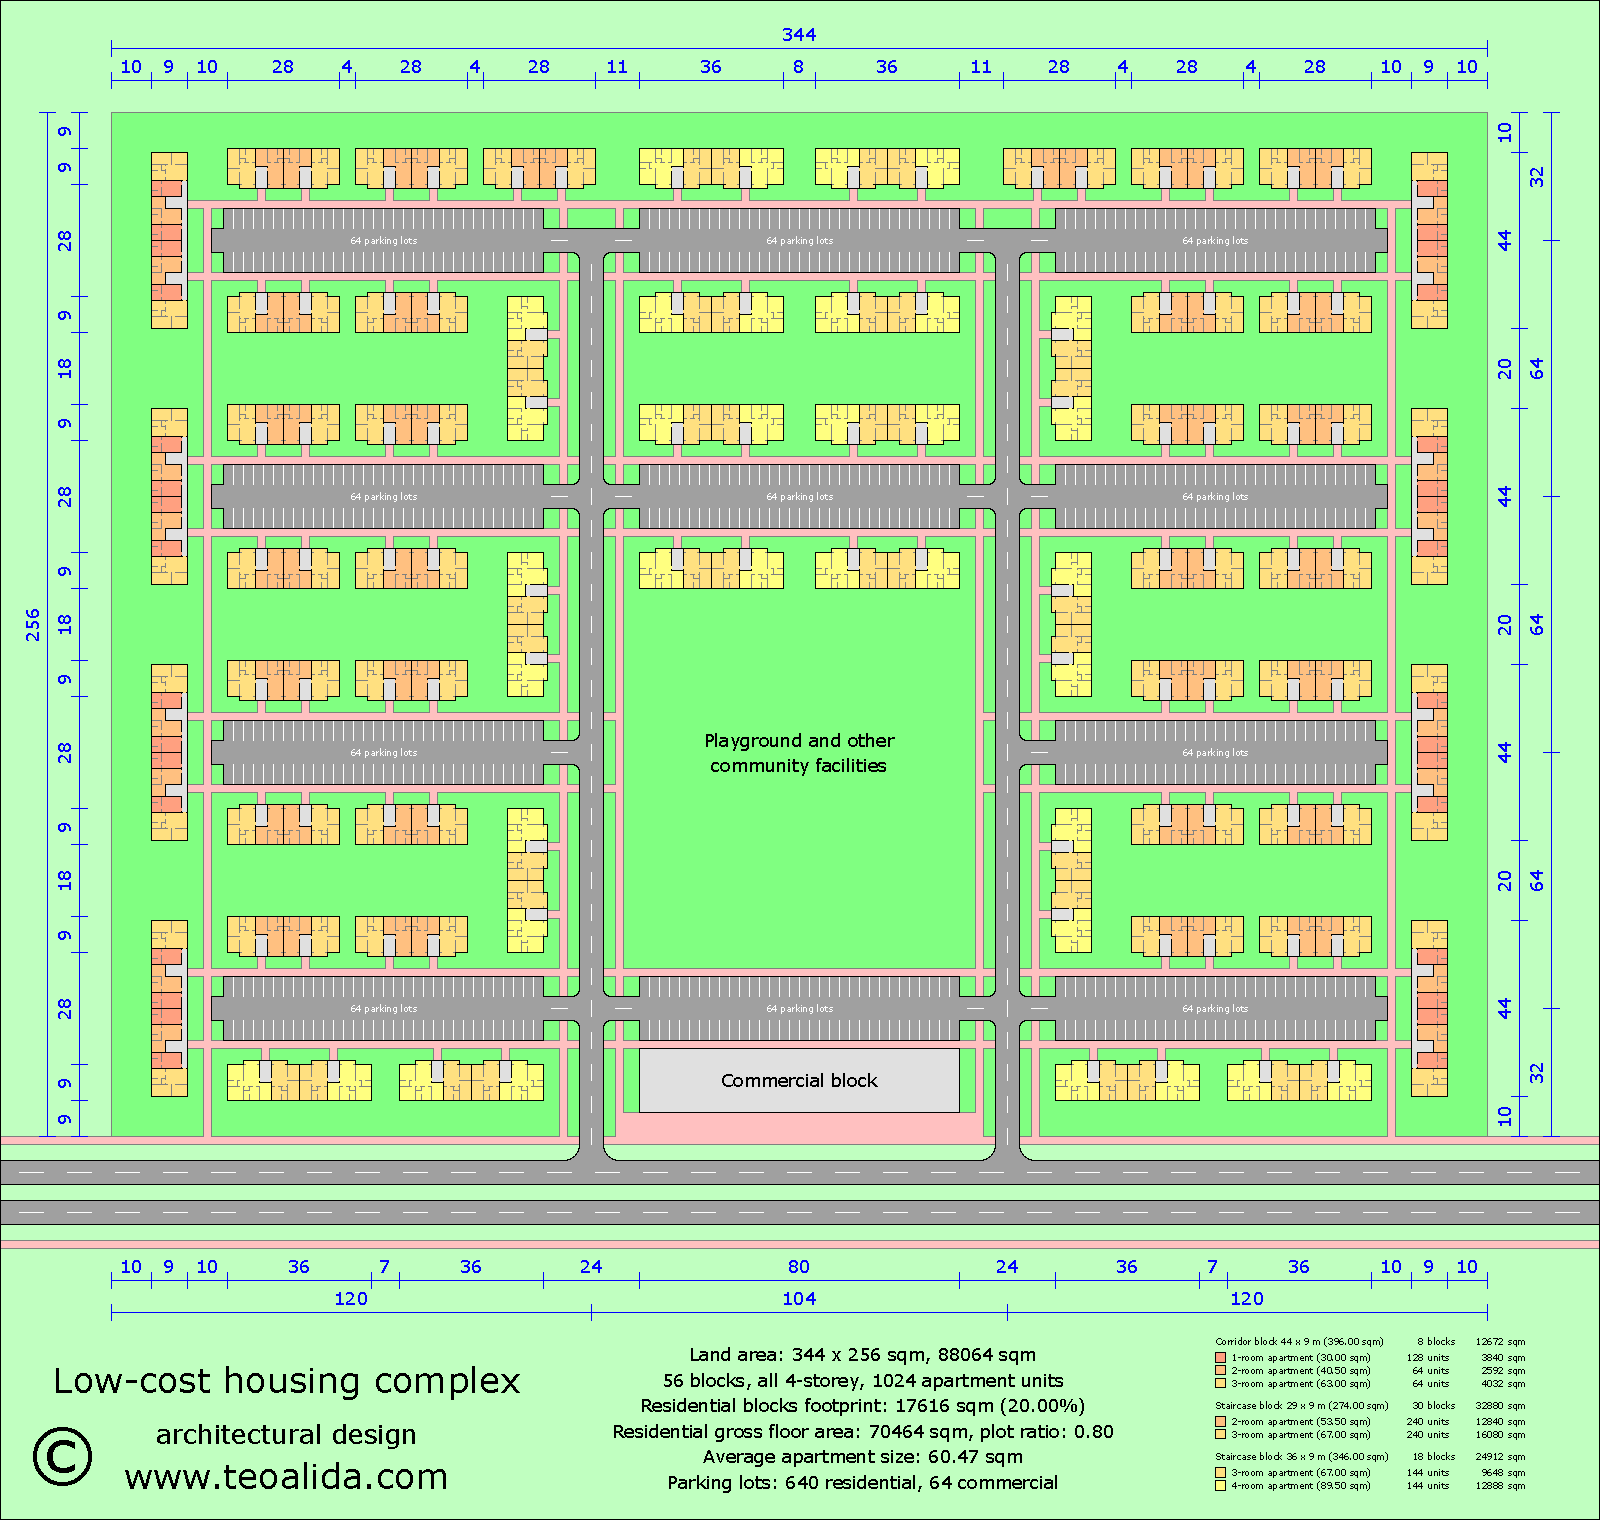 Low-cost housing complex